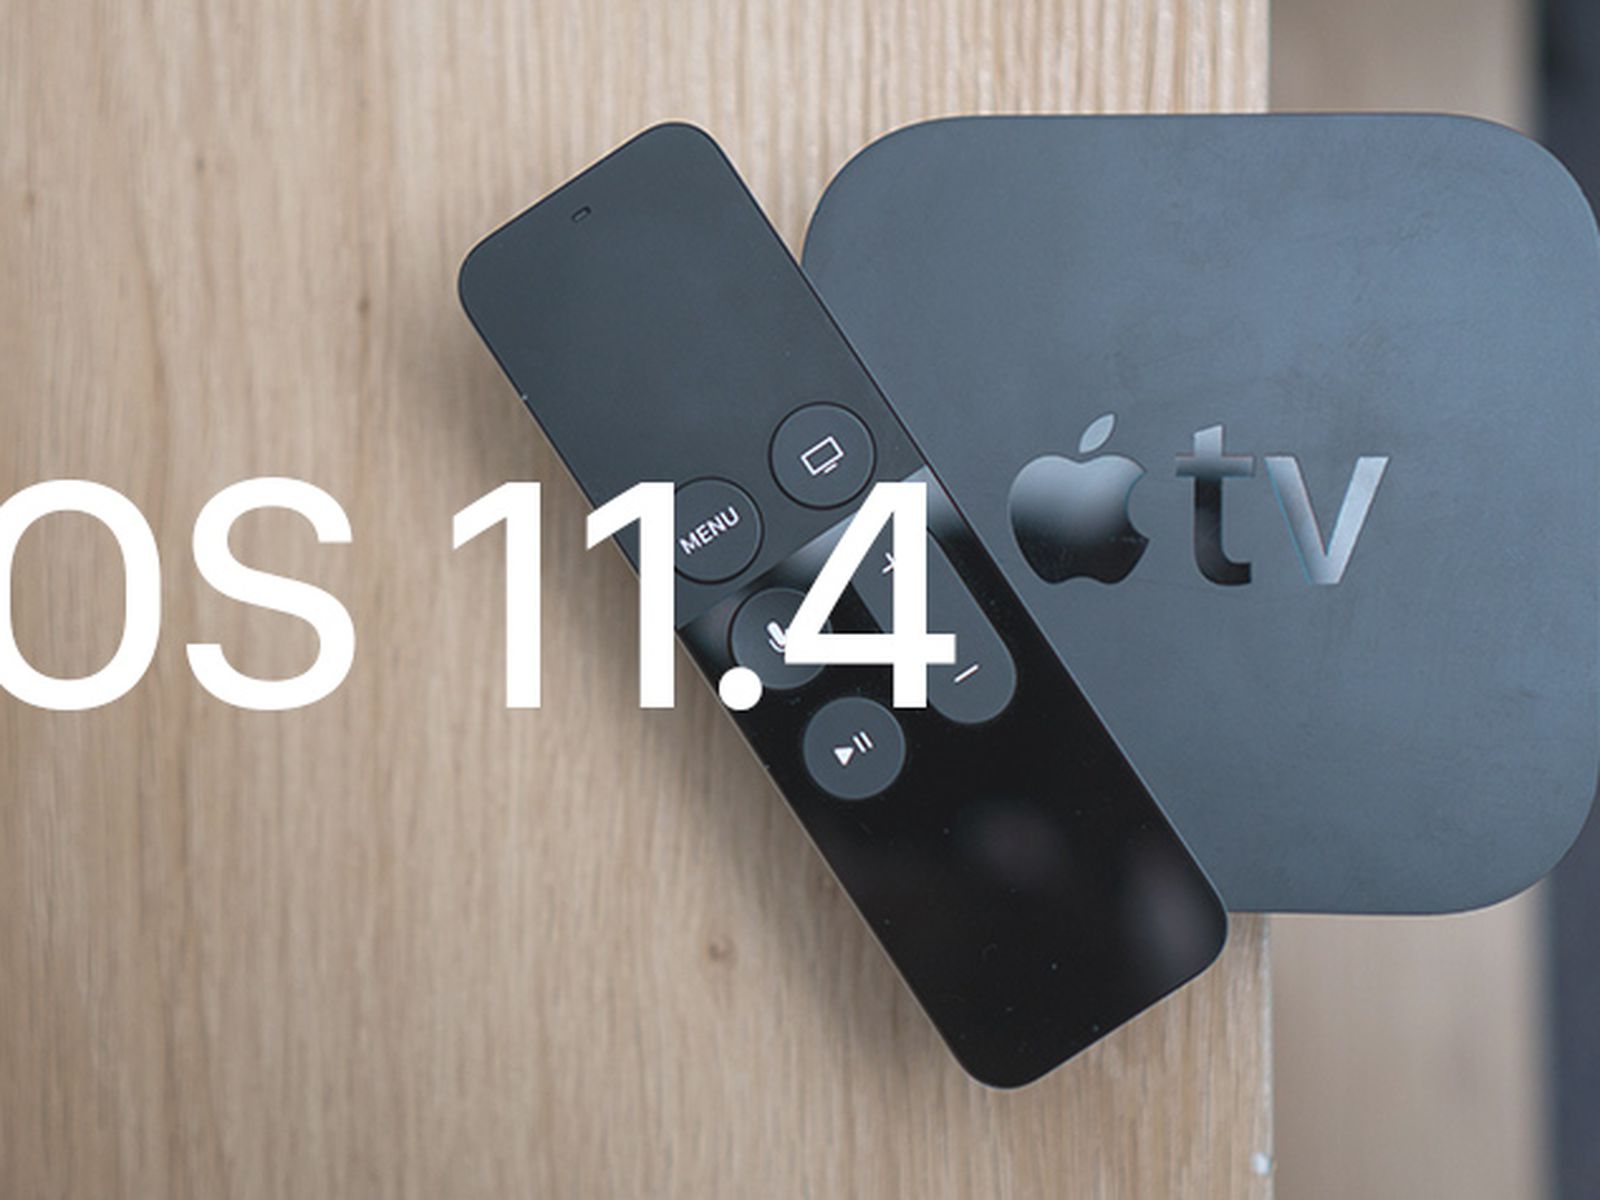 Apple Releases tvOS 11.4 for 4th and 5th Generation TV Models With AirPlay 2 Support MacRumors